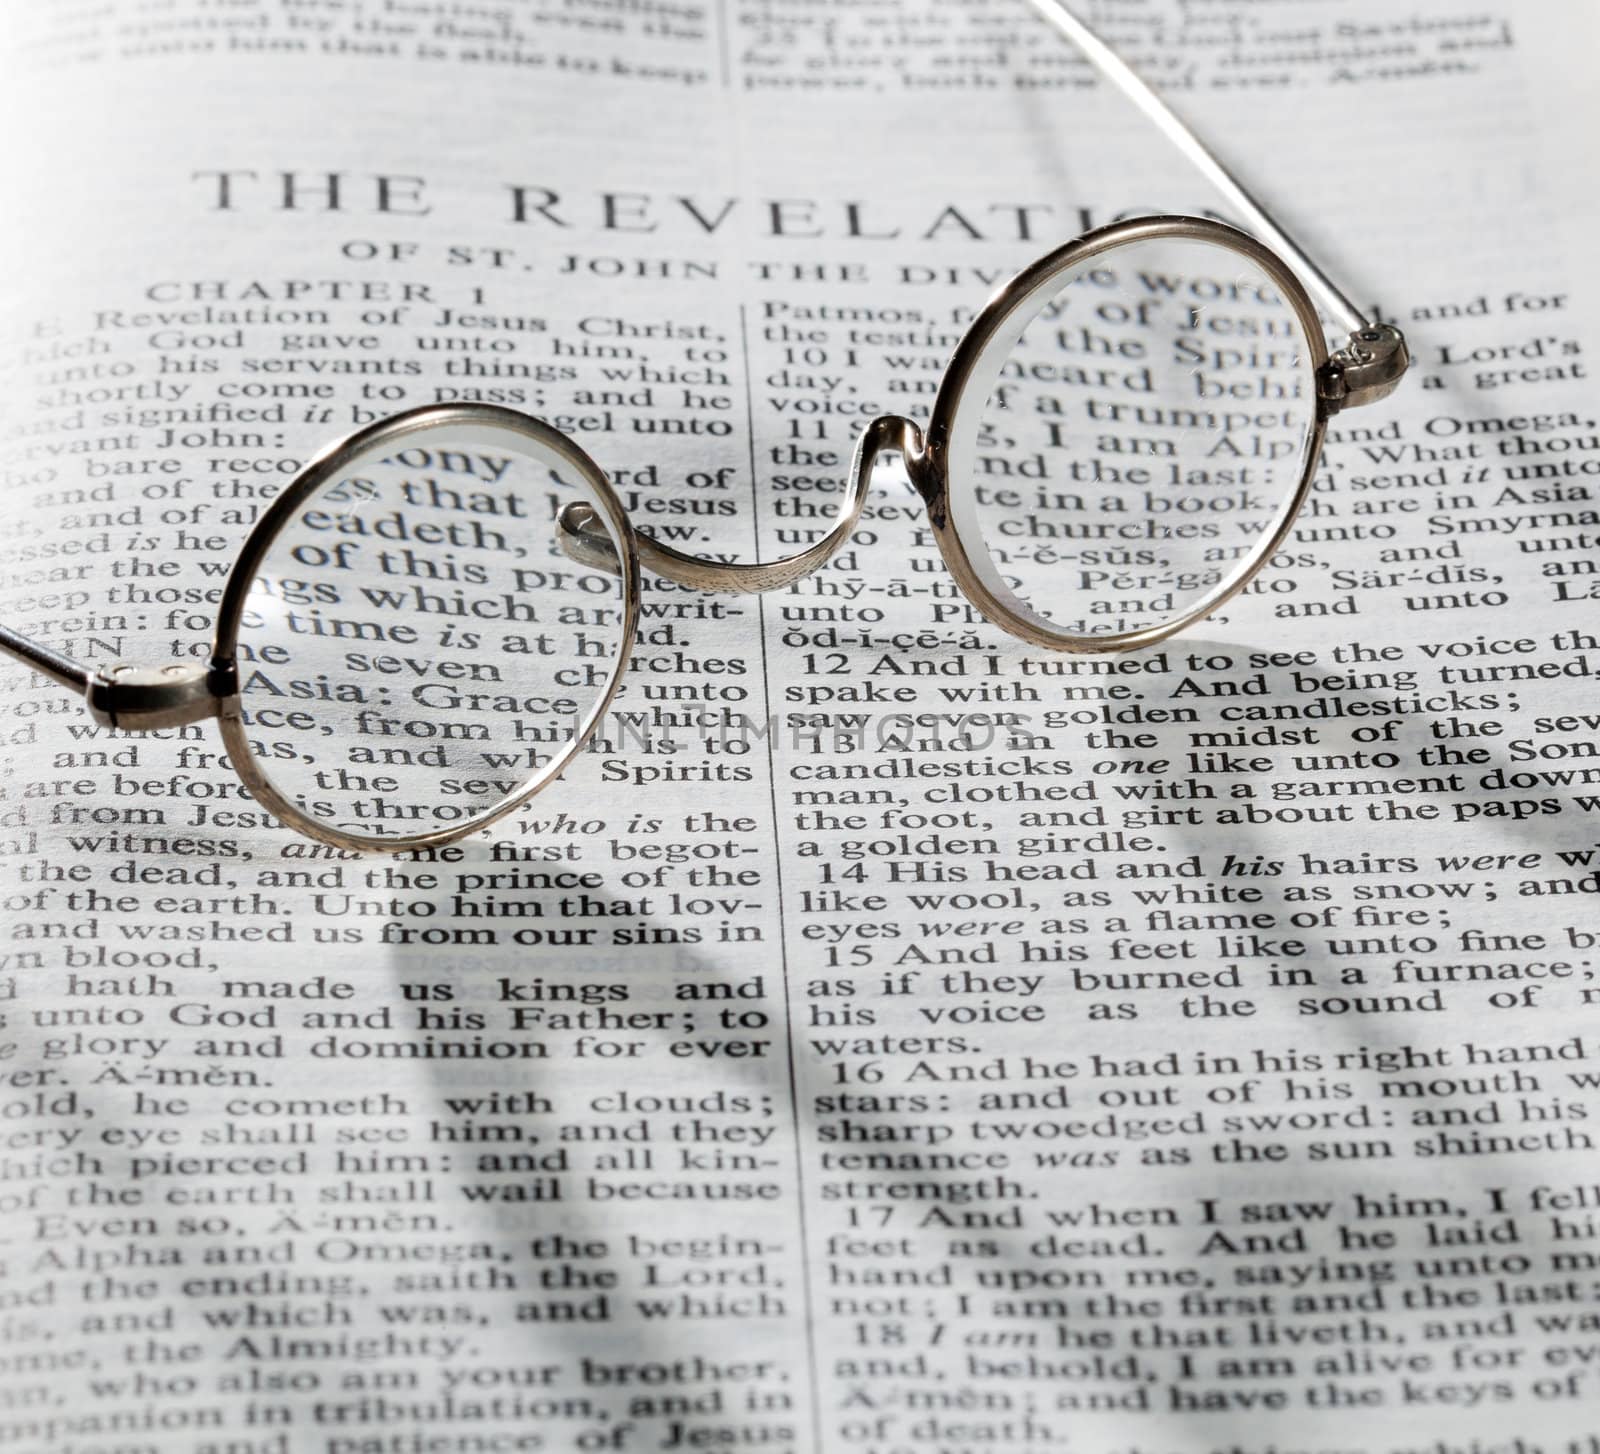 Old fashioned round reading glasses laying on a page from the bible on the revelation with strong shadow and out of focus areas